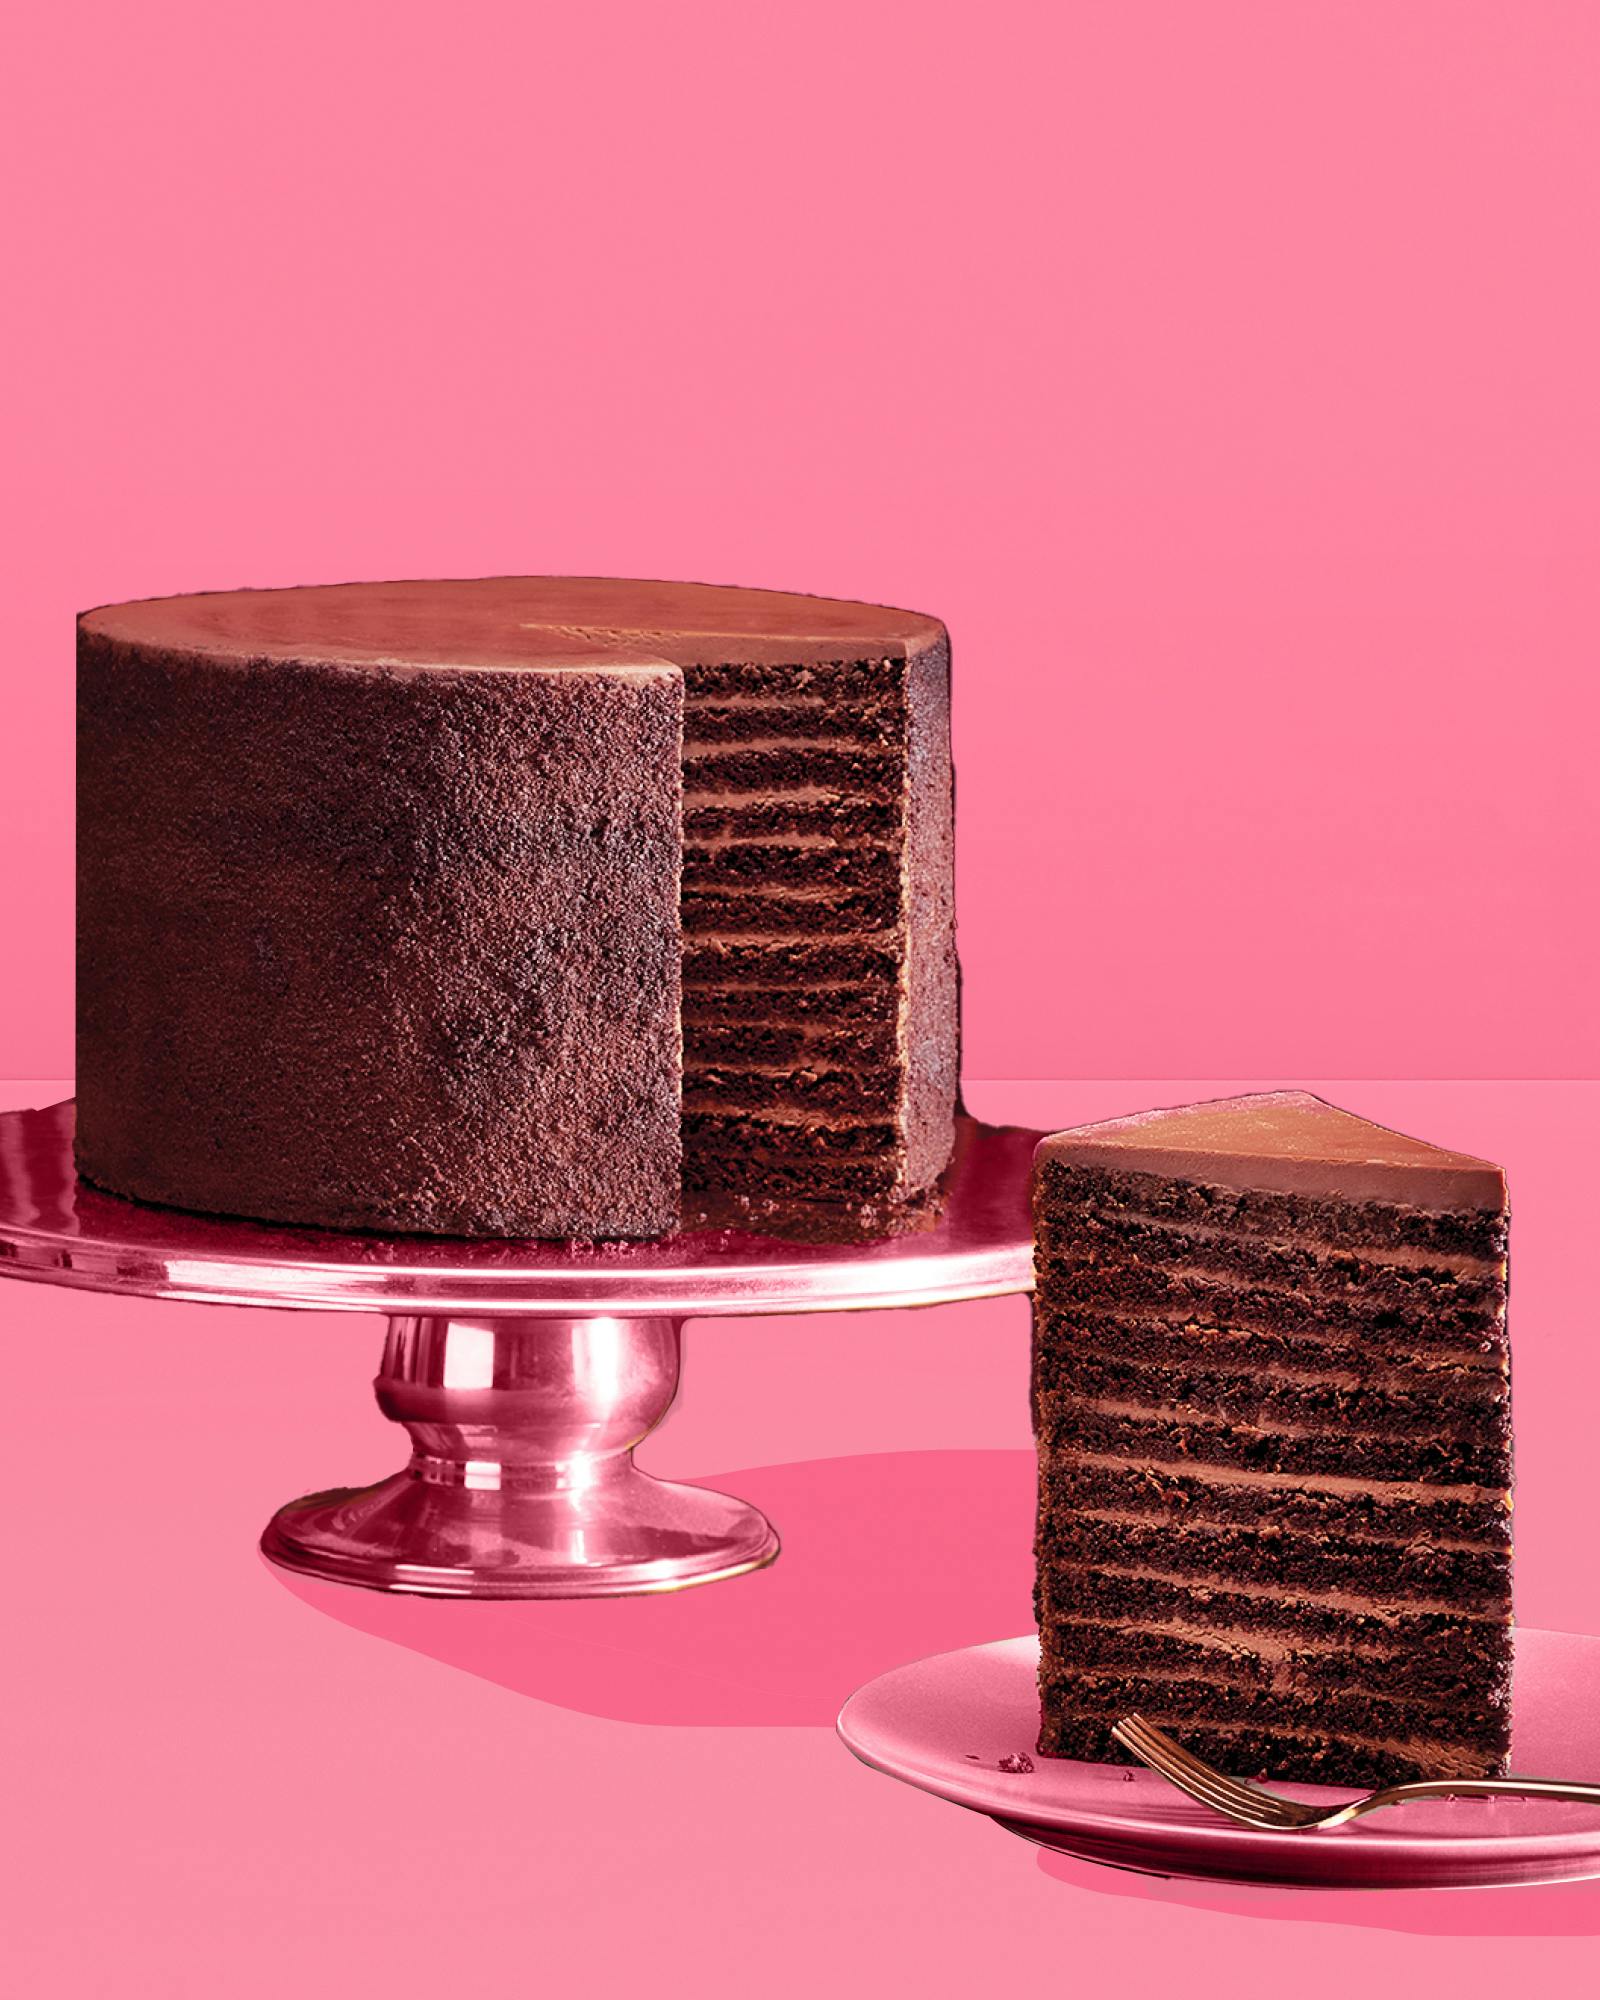 CHOCOLATE MINT LAYER CAKE — 600 ACRES